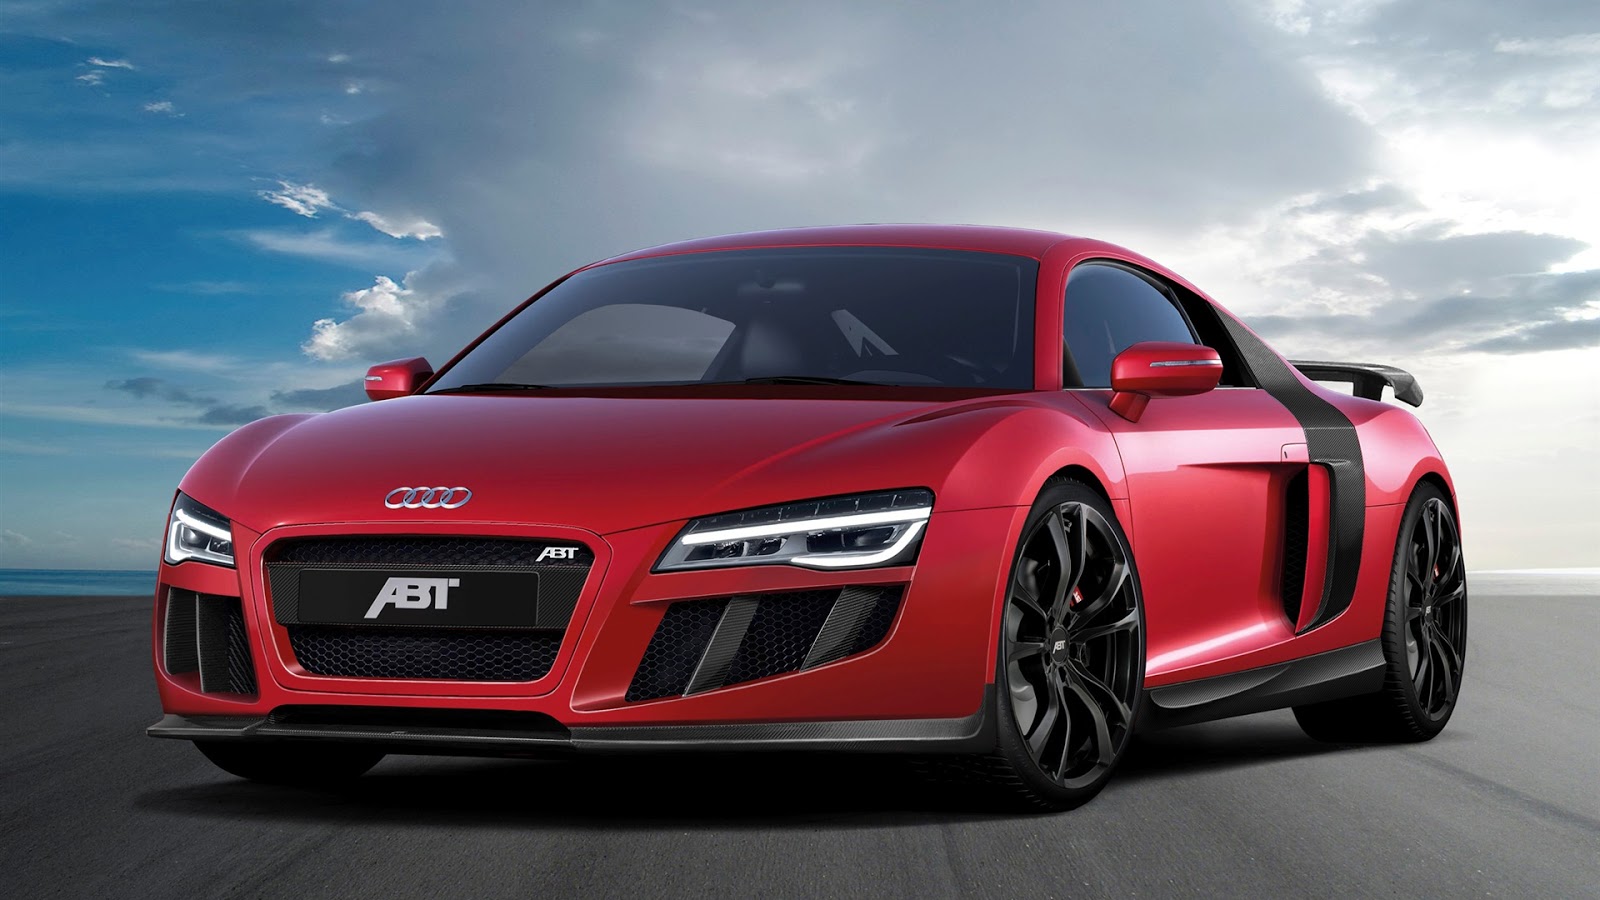 2013 audi r8 v10 spyder specs and price audi has made its r8 high ...